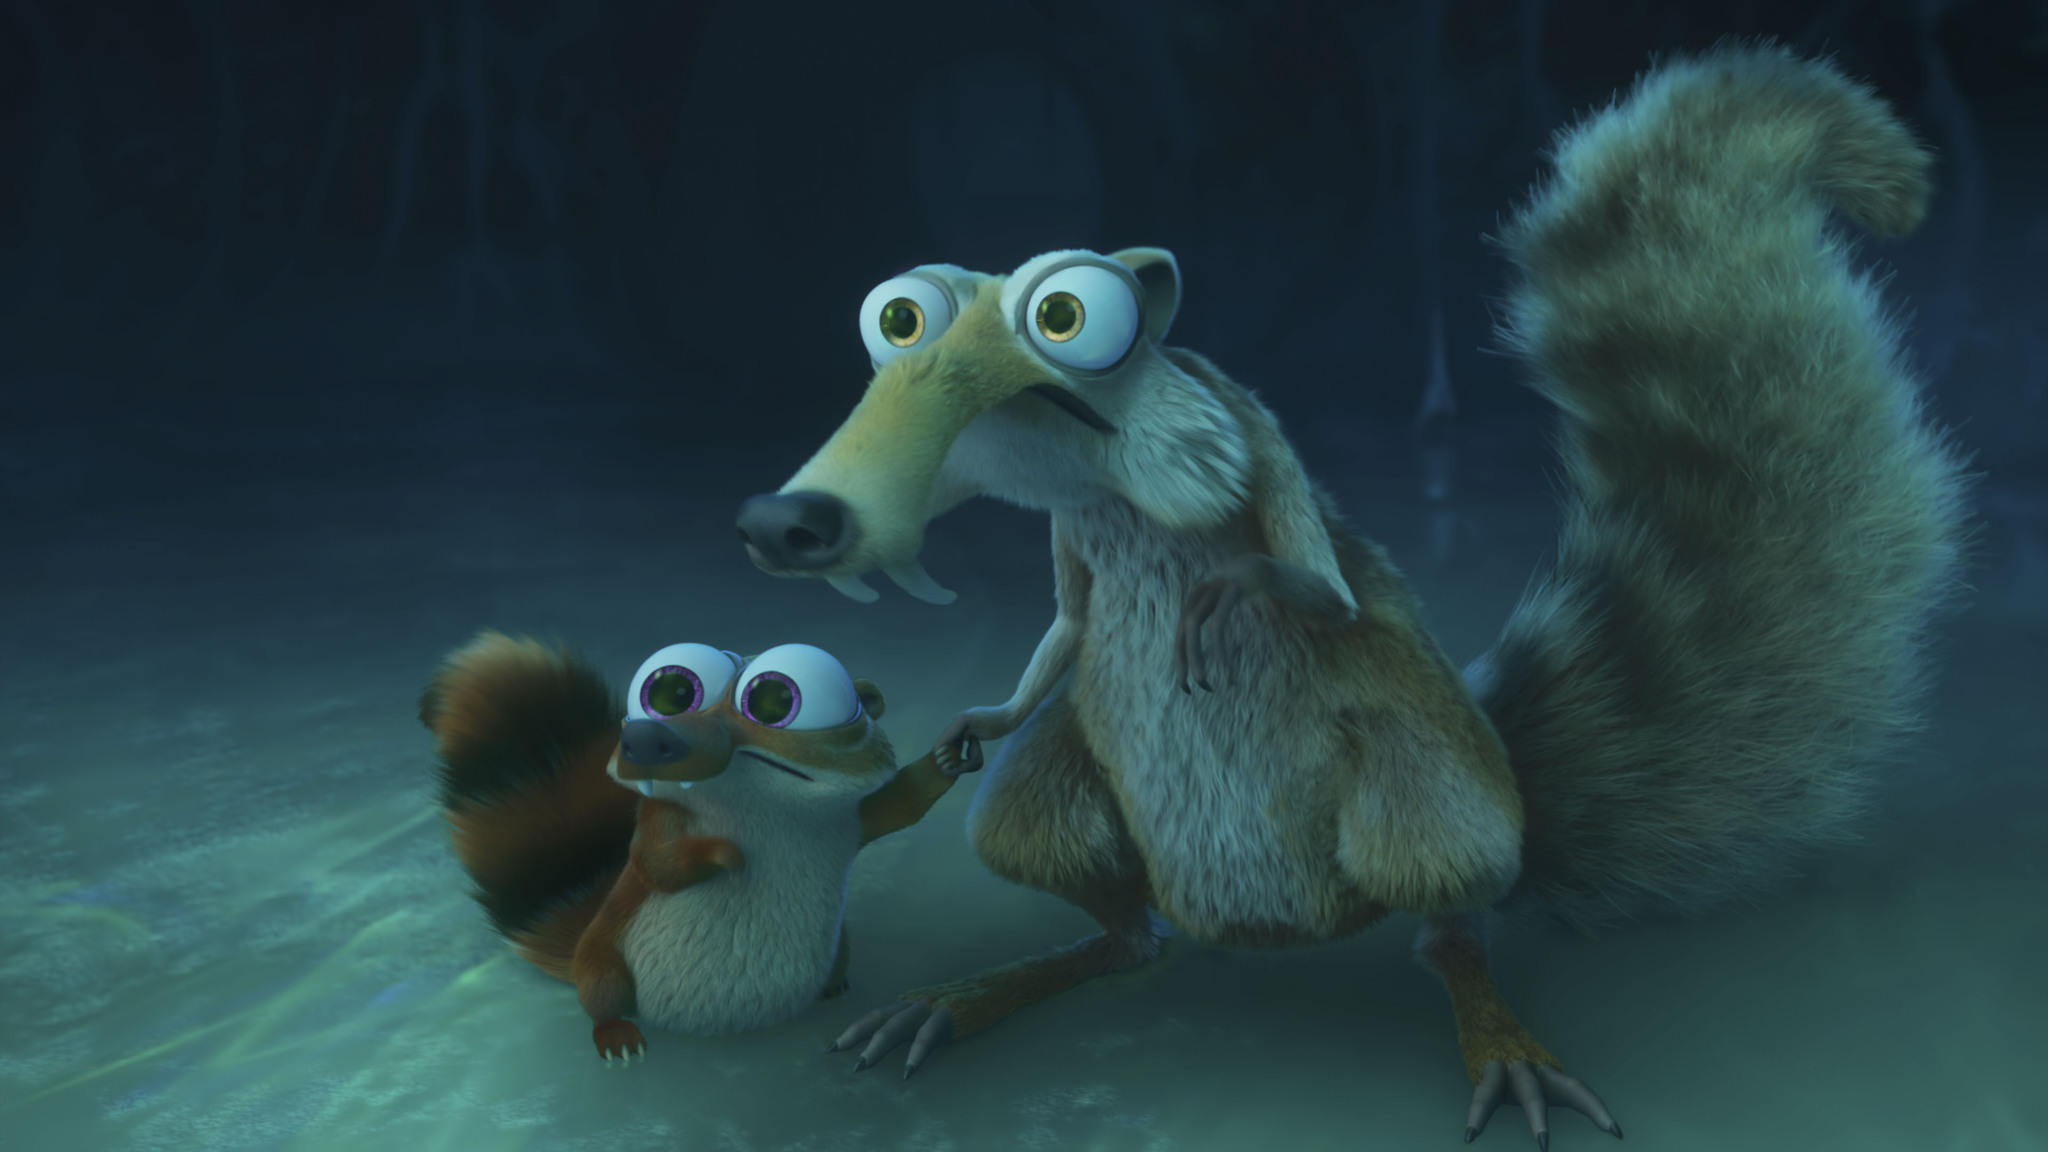 Ice Age: Scrat Tales Poster & Photo Tease Next Disney+ Animated Shorts